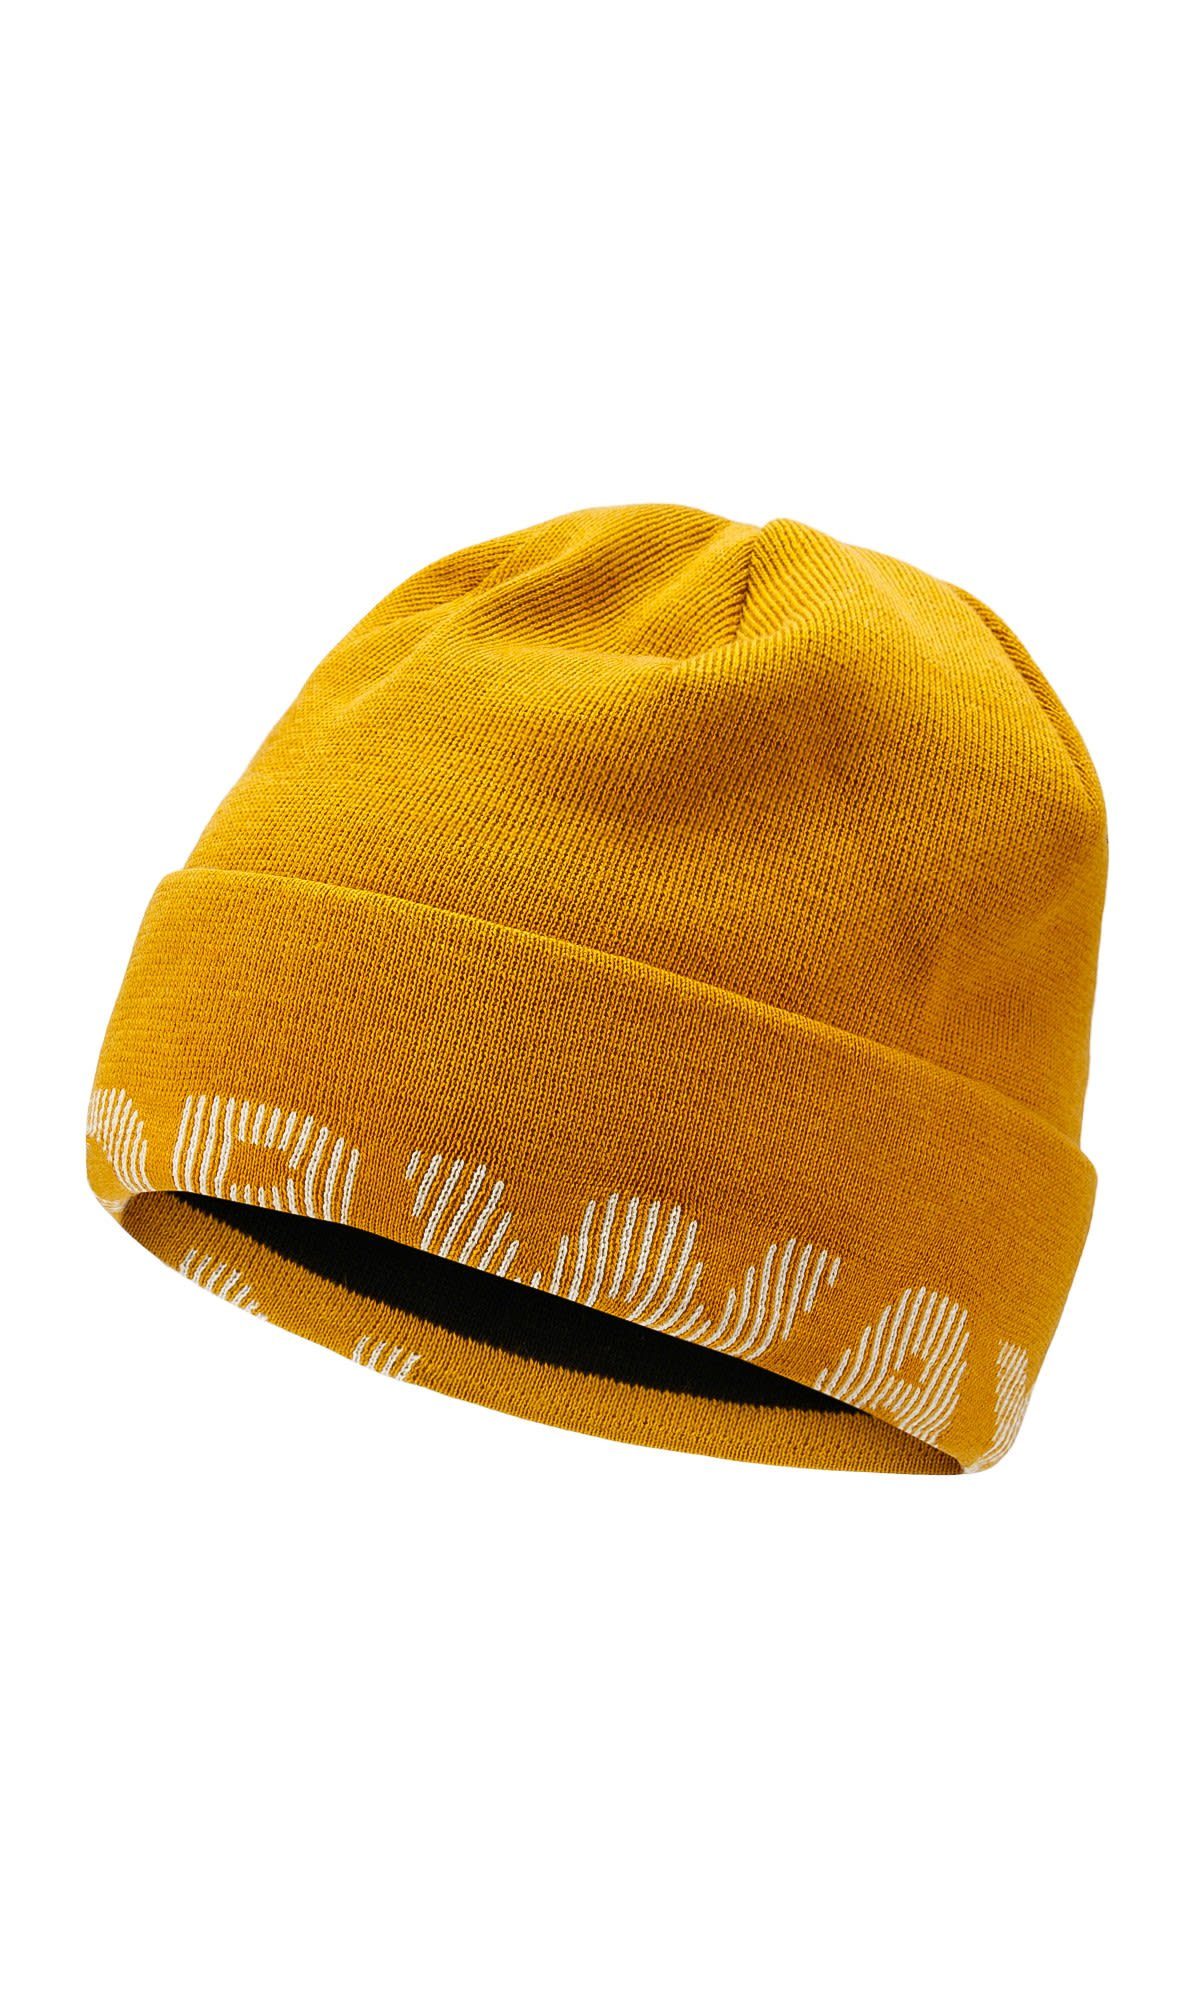 Dale of Norway Beanie Norway Hat Mustard Team Accessoires Dale Of Norway